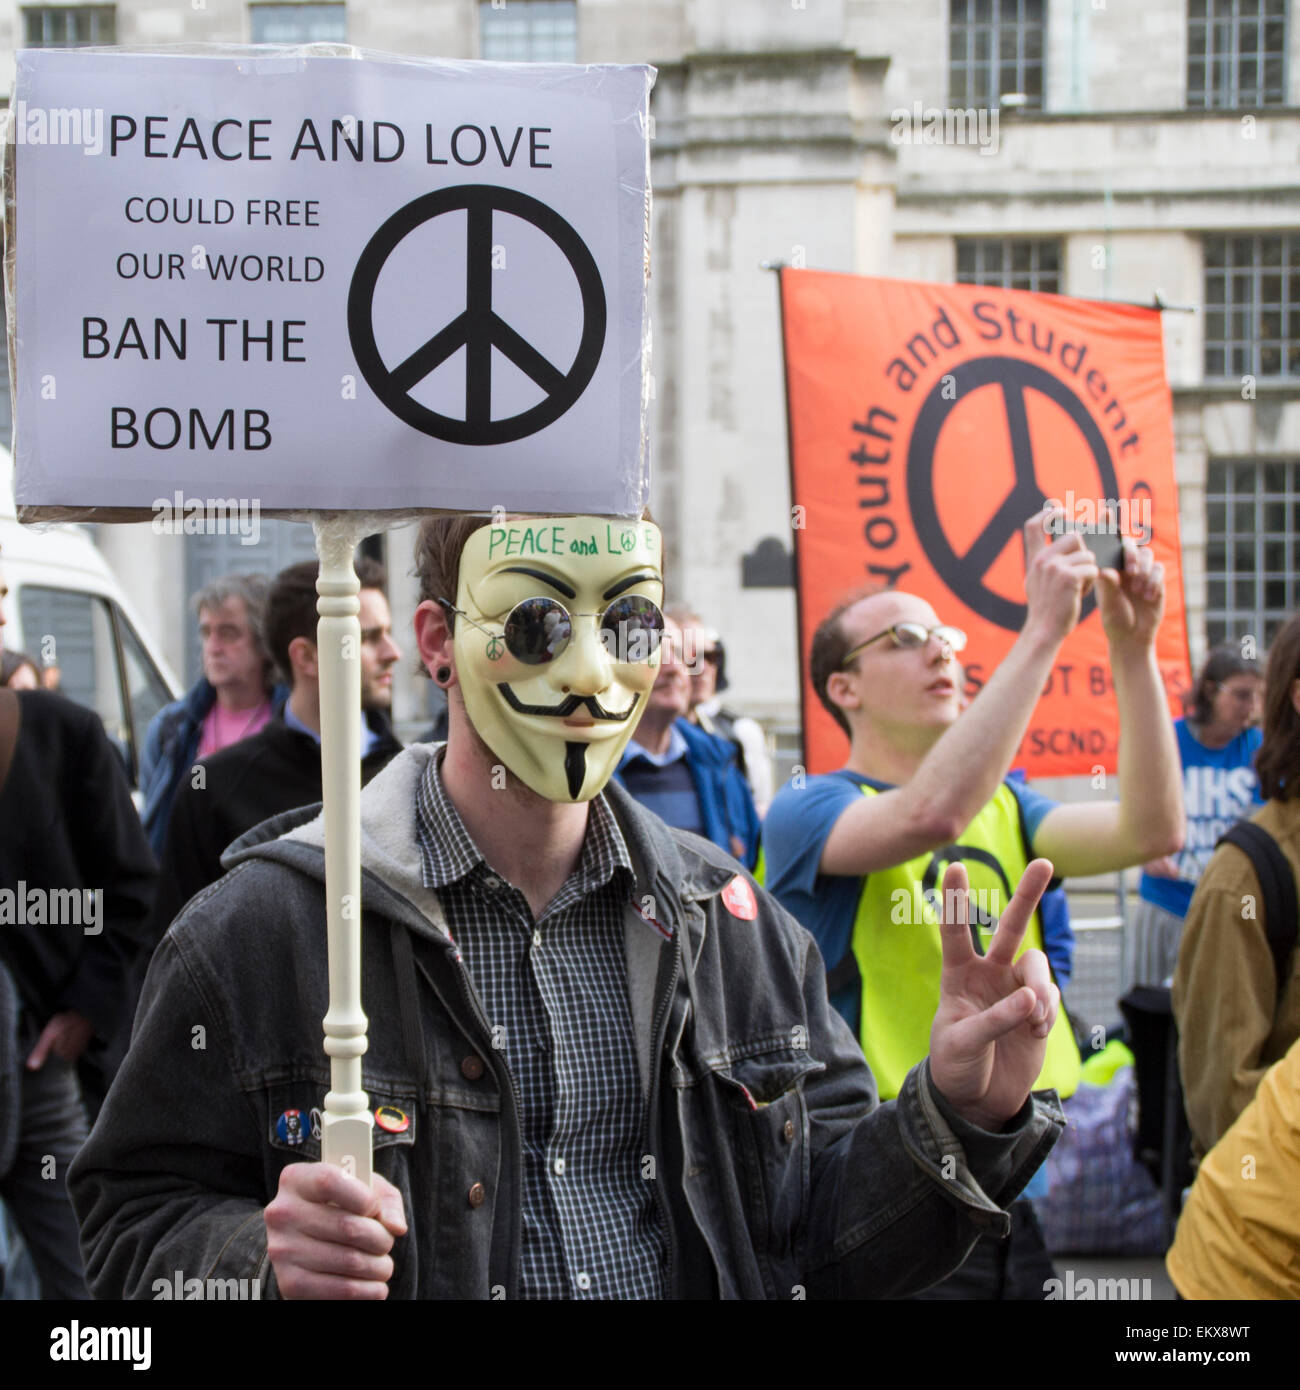 Whitehall, London, UK. 13th April, 2015. Vote Out Trident, an evening of Party and Protest against the renewal of Trident outside the Ministry of Defence building. Credit:  Paul Mendoza/Alamy Live News Stock Photo